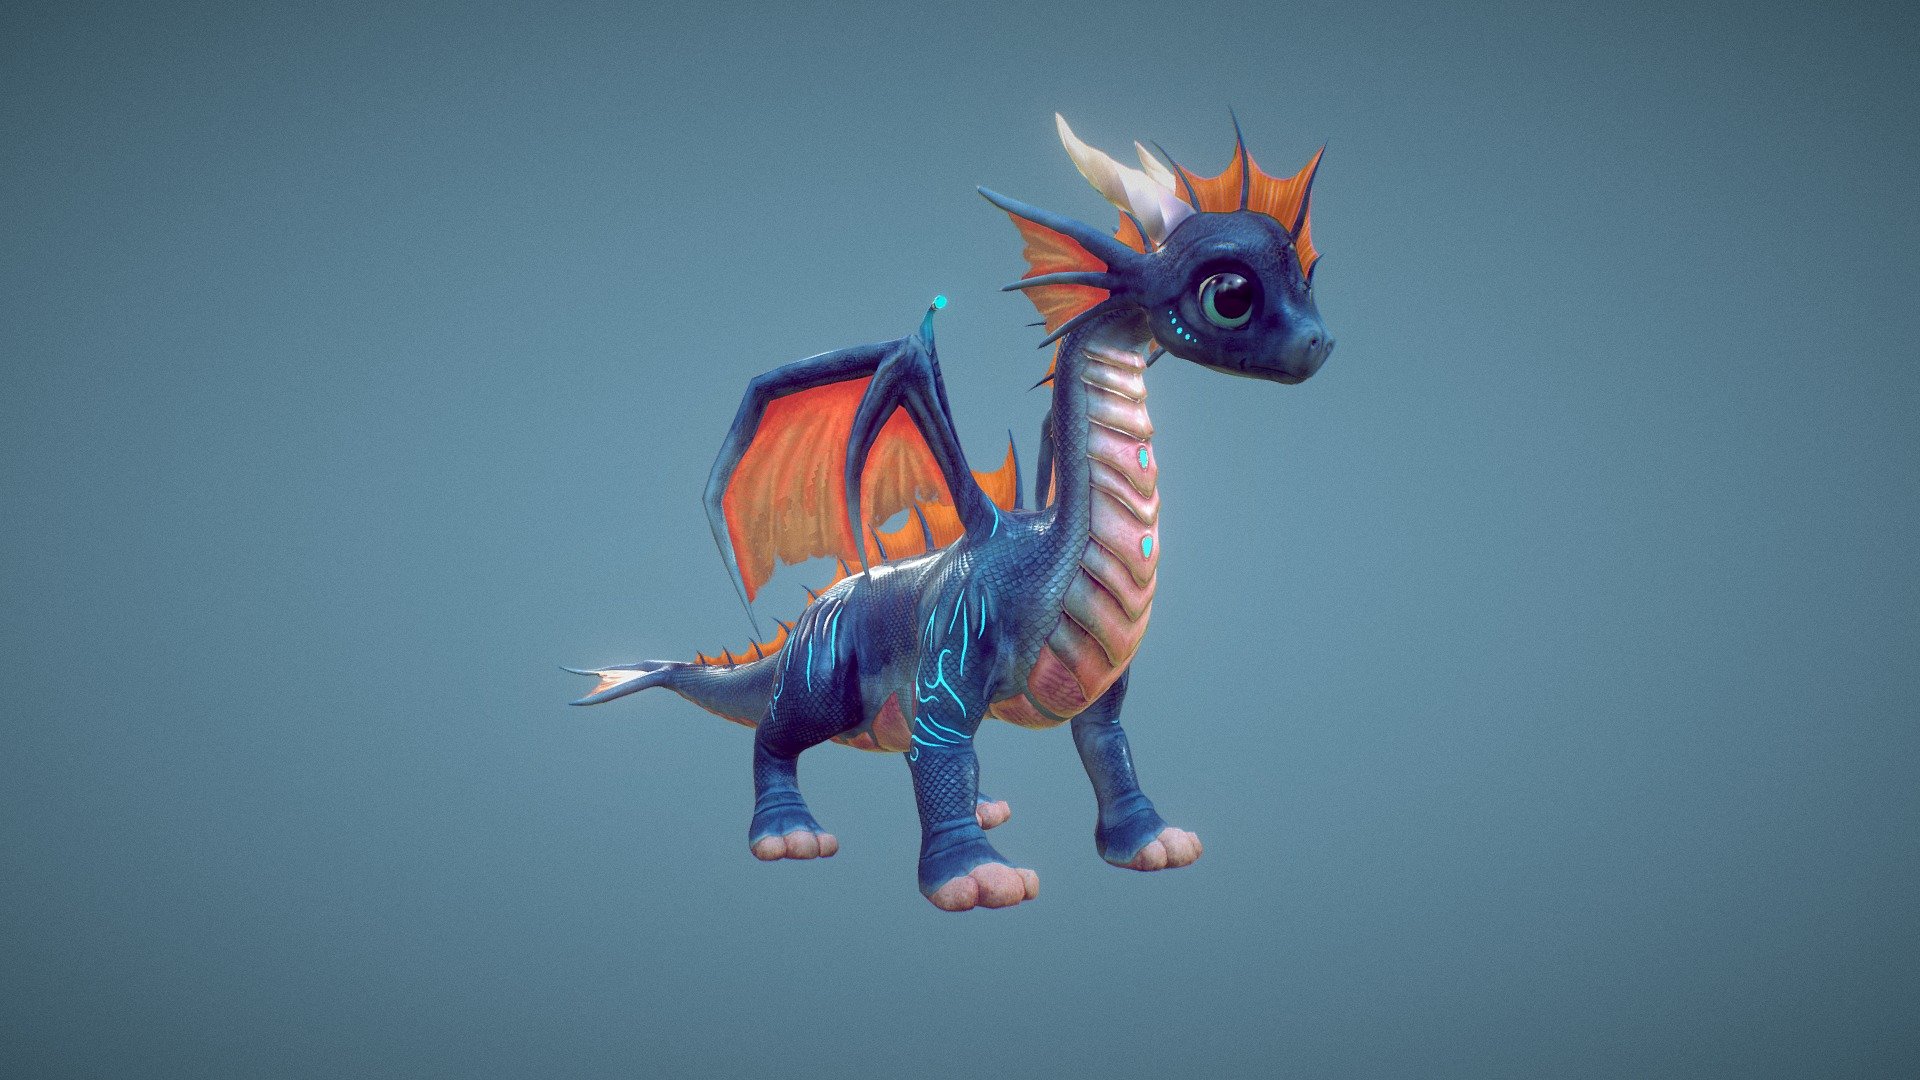 Realistic Update for the little Dragons Sea

Find it on the Asset Store http://bit.ly/LDragoS

See it here in action: https://www.youtube.com/watch?v=Zjd9QG2oZuw

They come with +100 AAA Animations

It includes character controller, and an animator component but you can always create your own or modify the existing one.

This controller includes these Logic’s:




Locomotion

Terrain

Fall

Jump

Fly

Swim

UnderWater

Attack (Melee &amp; Fire)

ADDITIONAL LICENSE

The following custom license applies to this asset in addition to the EULA.

END USER will be prohibited from using the asset license for the following products:




Creation &amp; Trading of Non-Fungible-Tokens (NFT) and/or use in Blockchain-based projects or products.

Creation of content for Metaverse related and/or Game creation software and products.

3D printing for commercial use.

Remix, transform or build upon the material, and re-sell the modified material.
 - Little Dragons: Sea Realistic - Buy Royalty Free 3D model by Malbers Animations (@malbers.shark87) 3d model